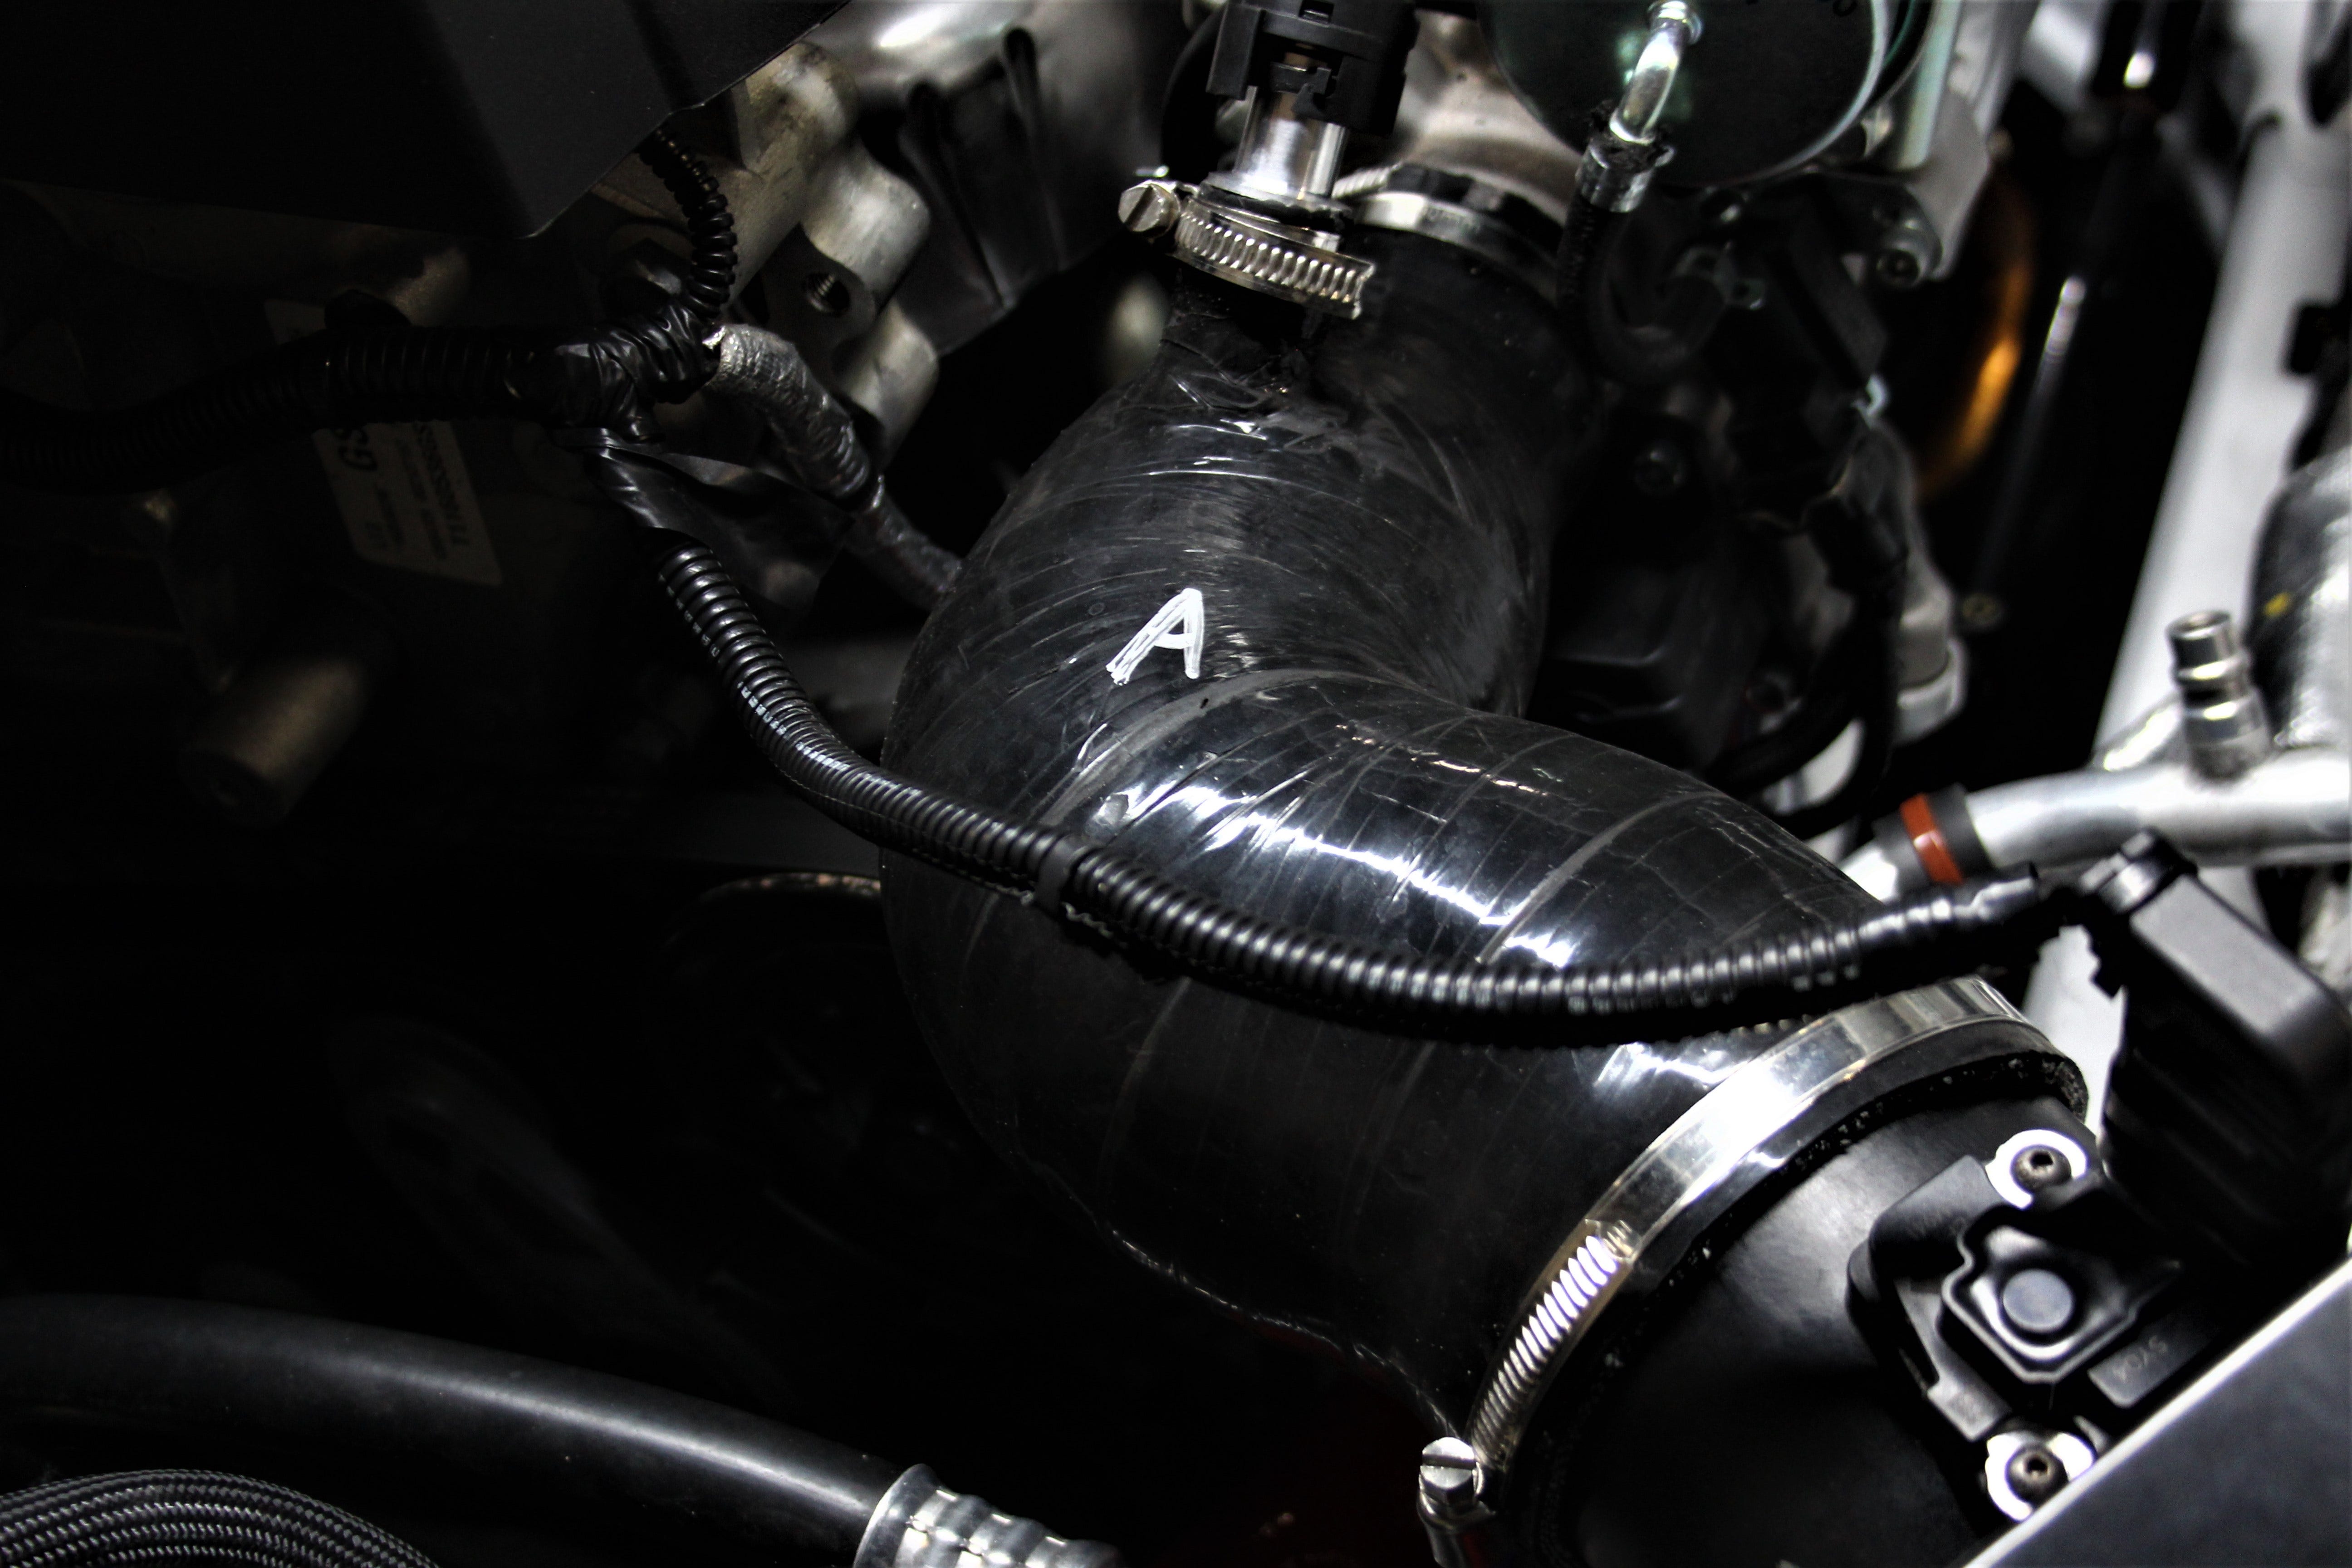 "The TurboChevy" Intake R&D, Part 3: Back To The Drawing Board